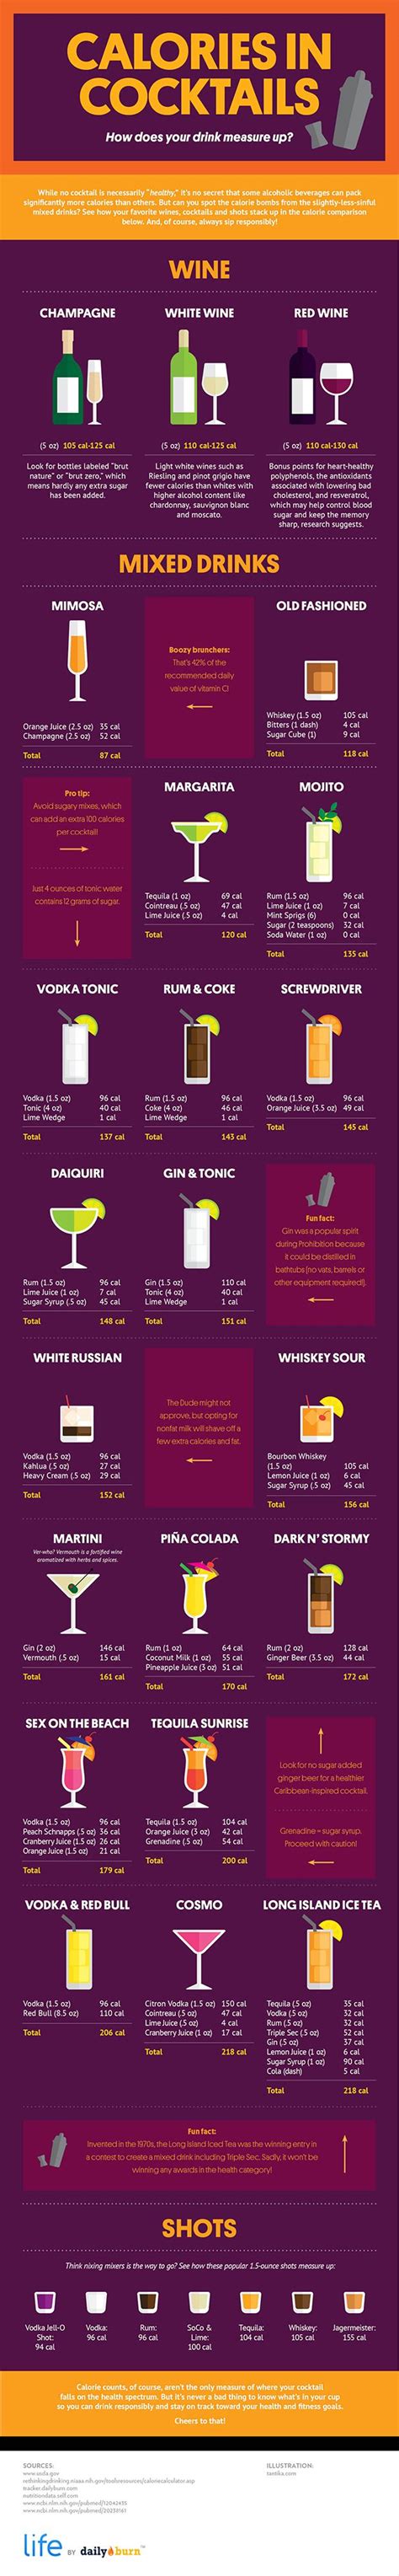 Calories in Cocktails: How Your Drink Measures Up #infographic #healthy #boozing Cocktail Drinks ...